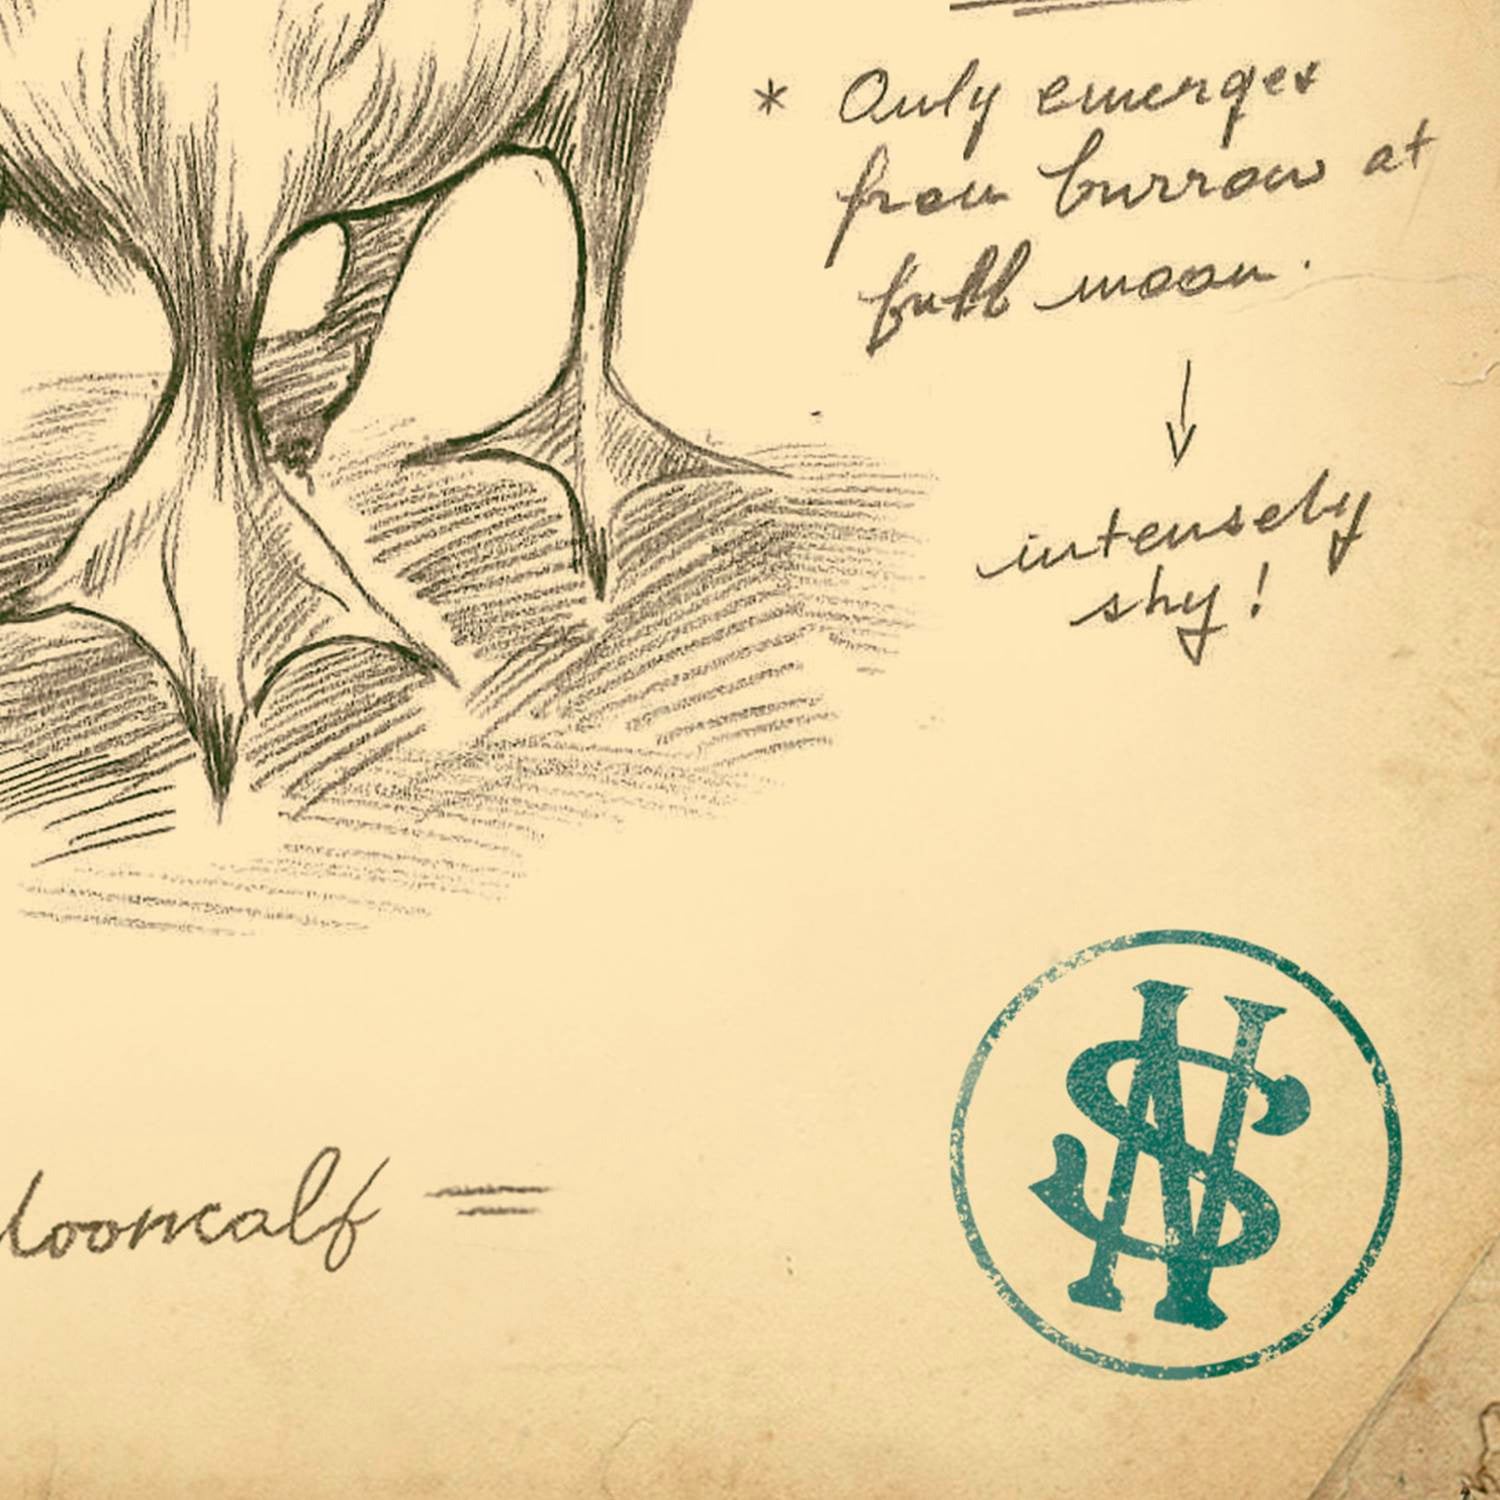 Mooncalf Sketch from Newt Scamander's Field Journal Limited Edition Art Print